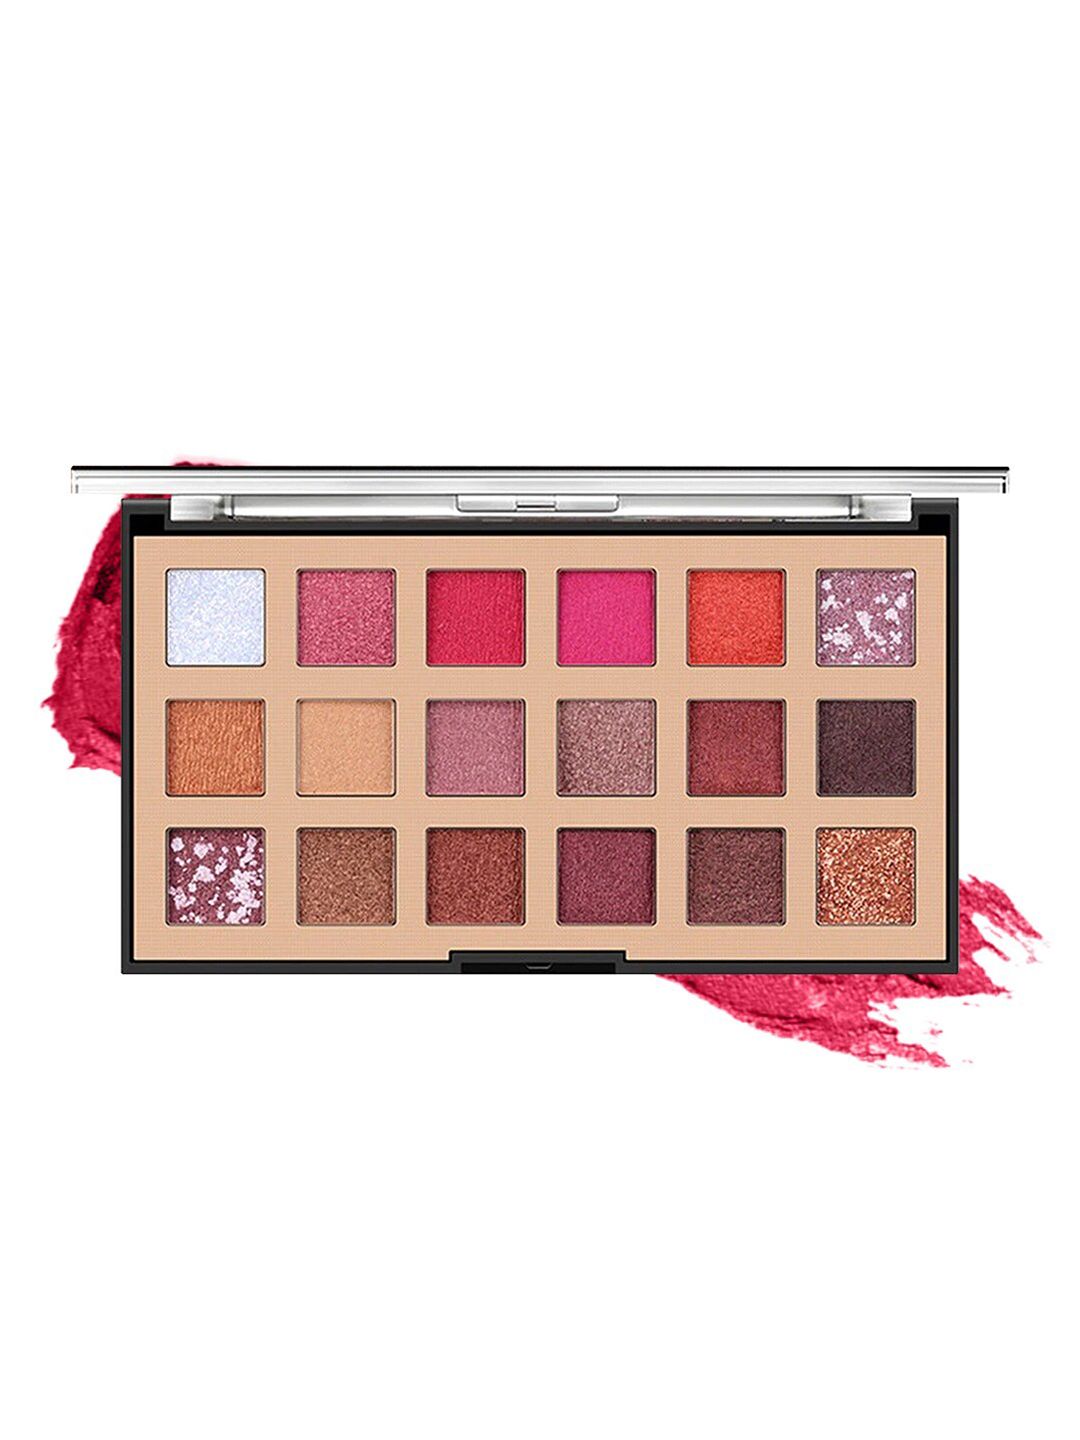 MISS ROSE 18 Color Matte & Glitter Nude Eyeshadow Palette 7001-437 M03 Price in India